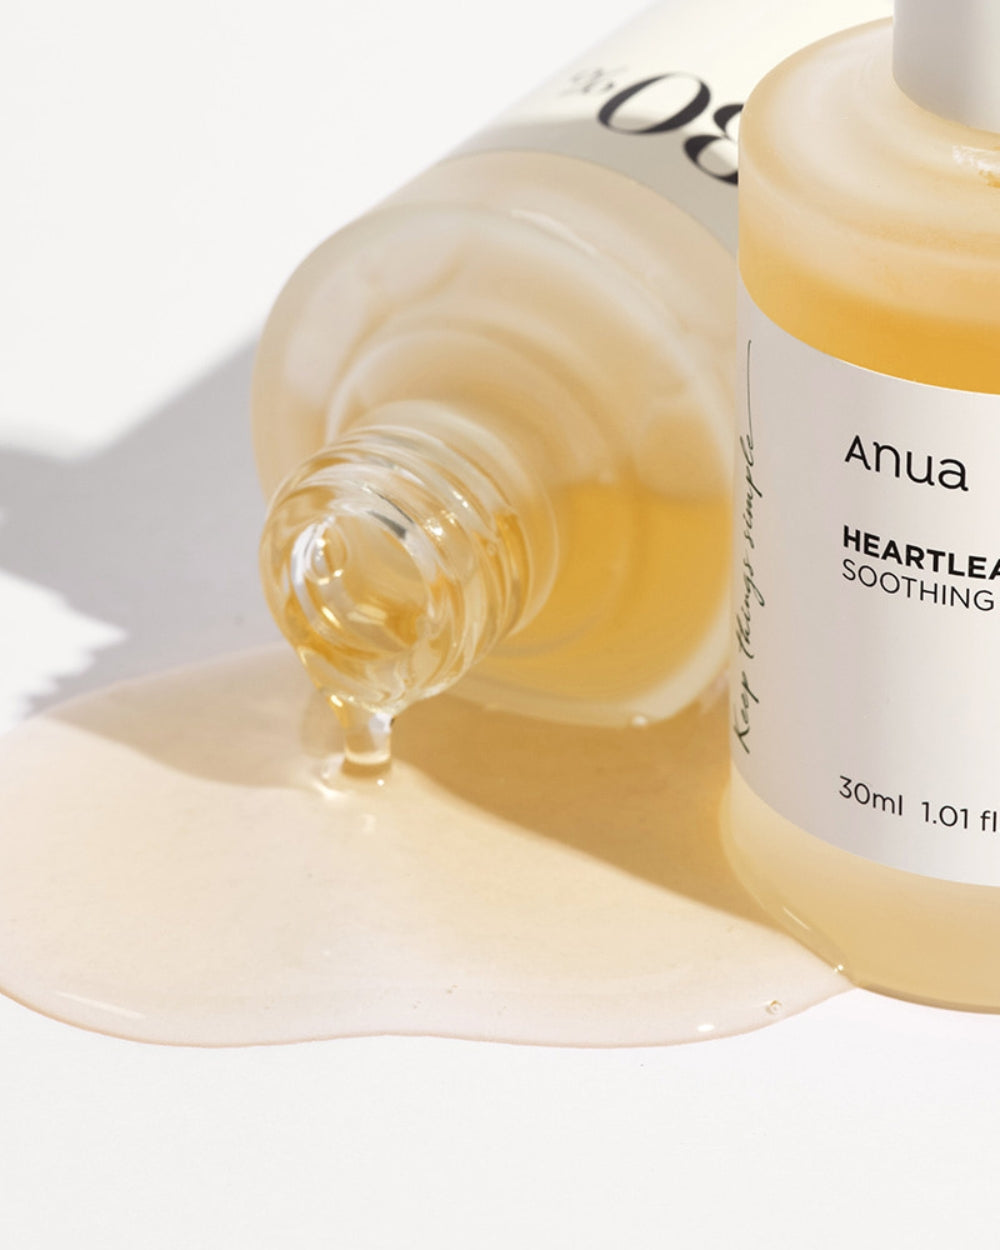 Anua - Heartleaf 80% Soothing Ampoule